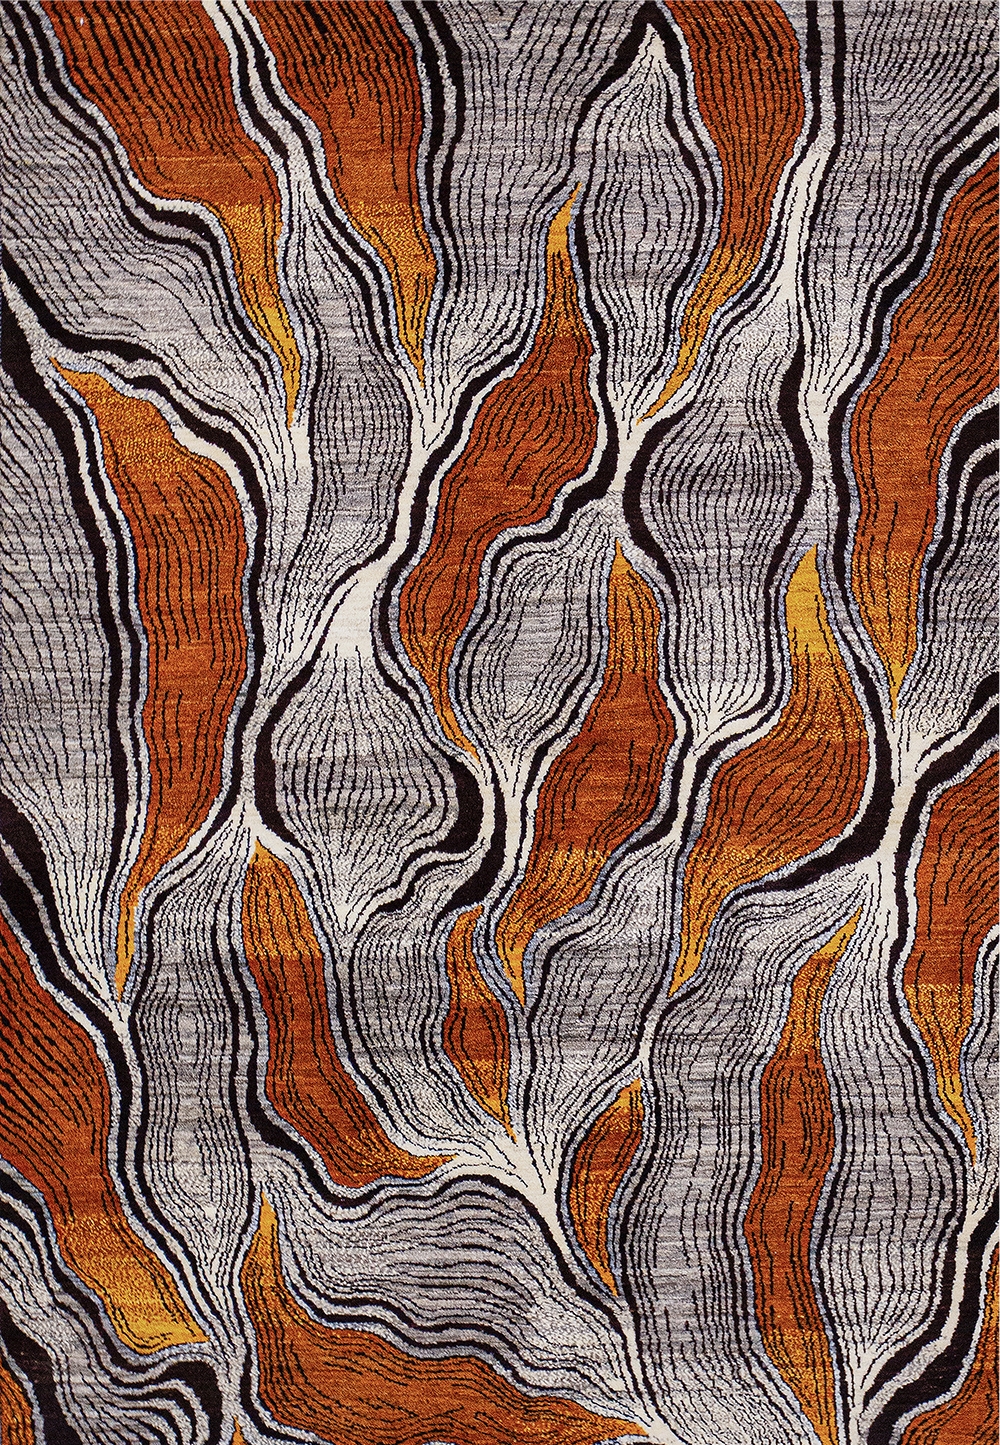 Flickering Fires 1a, Dreamtime Chants Collection, ZSFG, 170 x 240cm